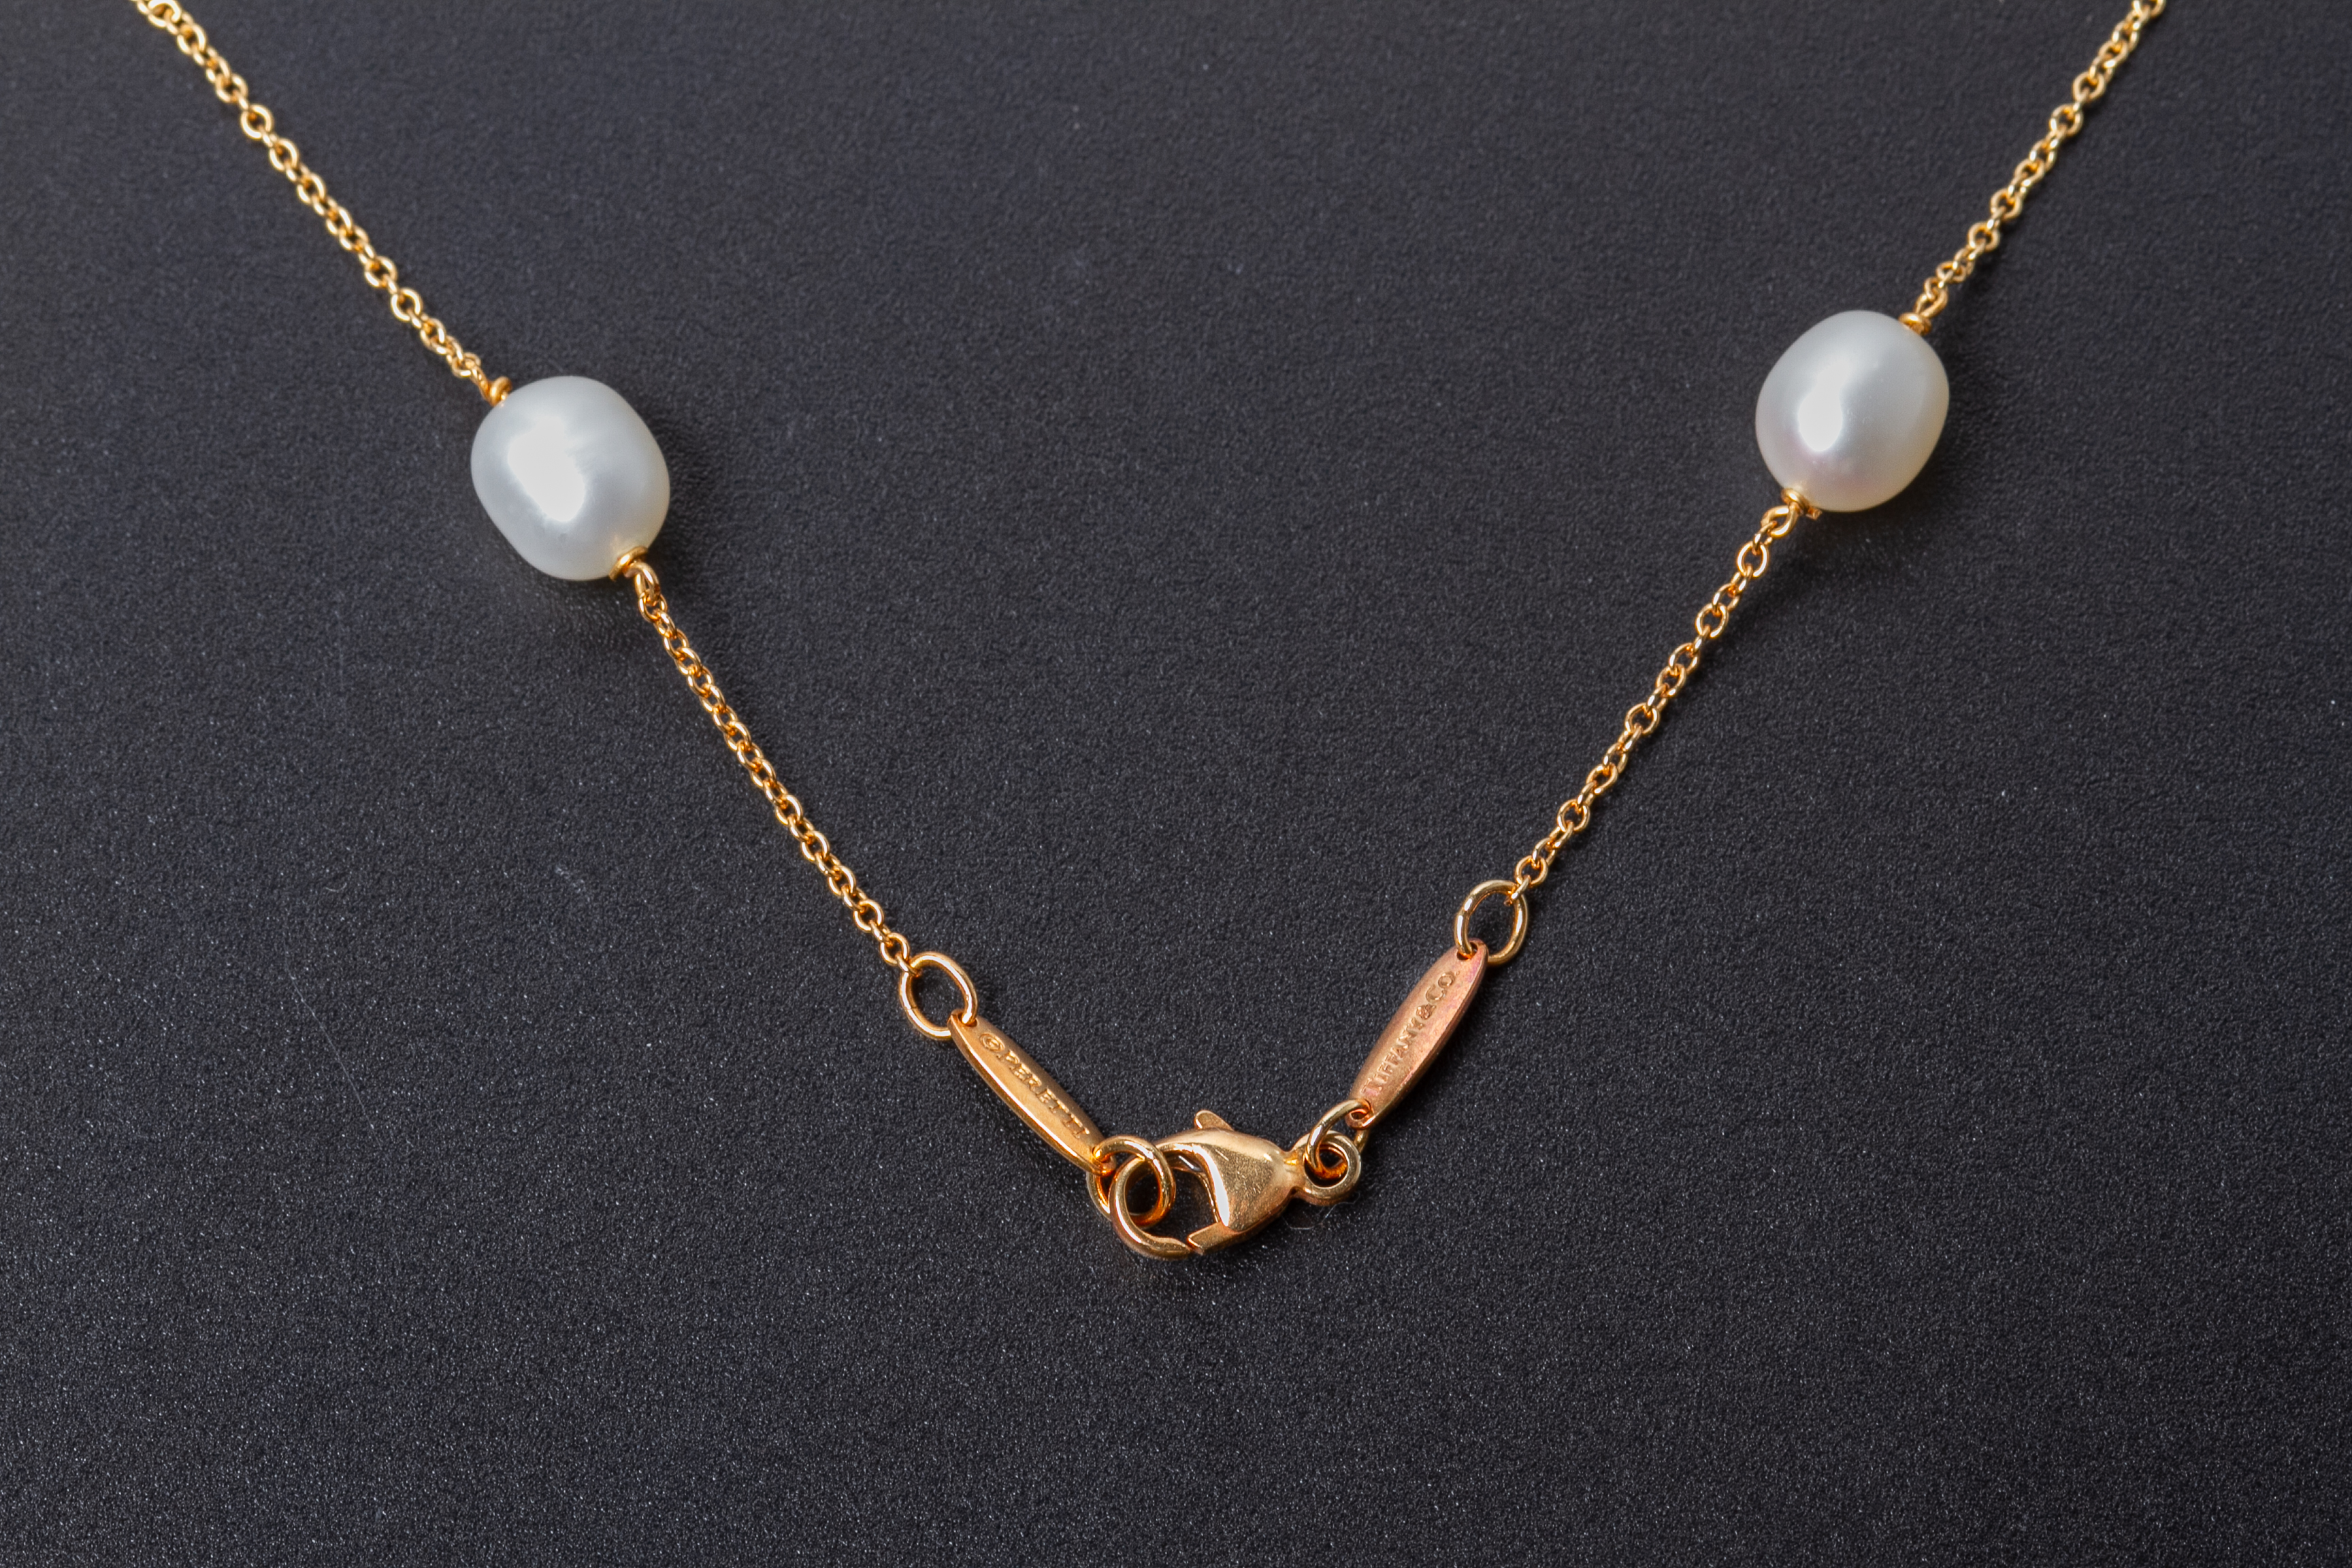 A TIFFANY & CO 'PEARLS BY THE YARD' NECKLACE BY ELSA PERETTI - Image 3 of 3